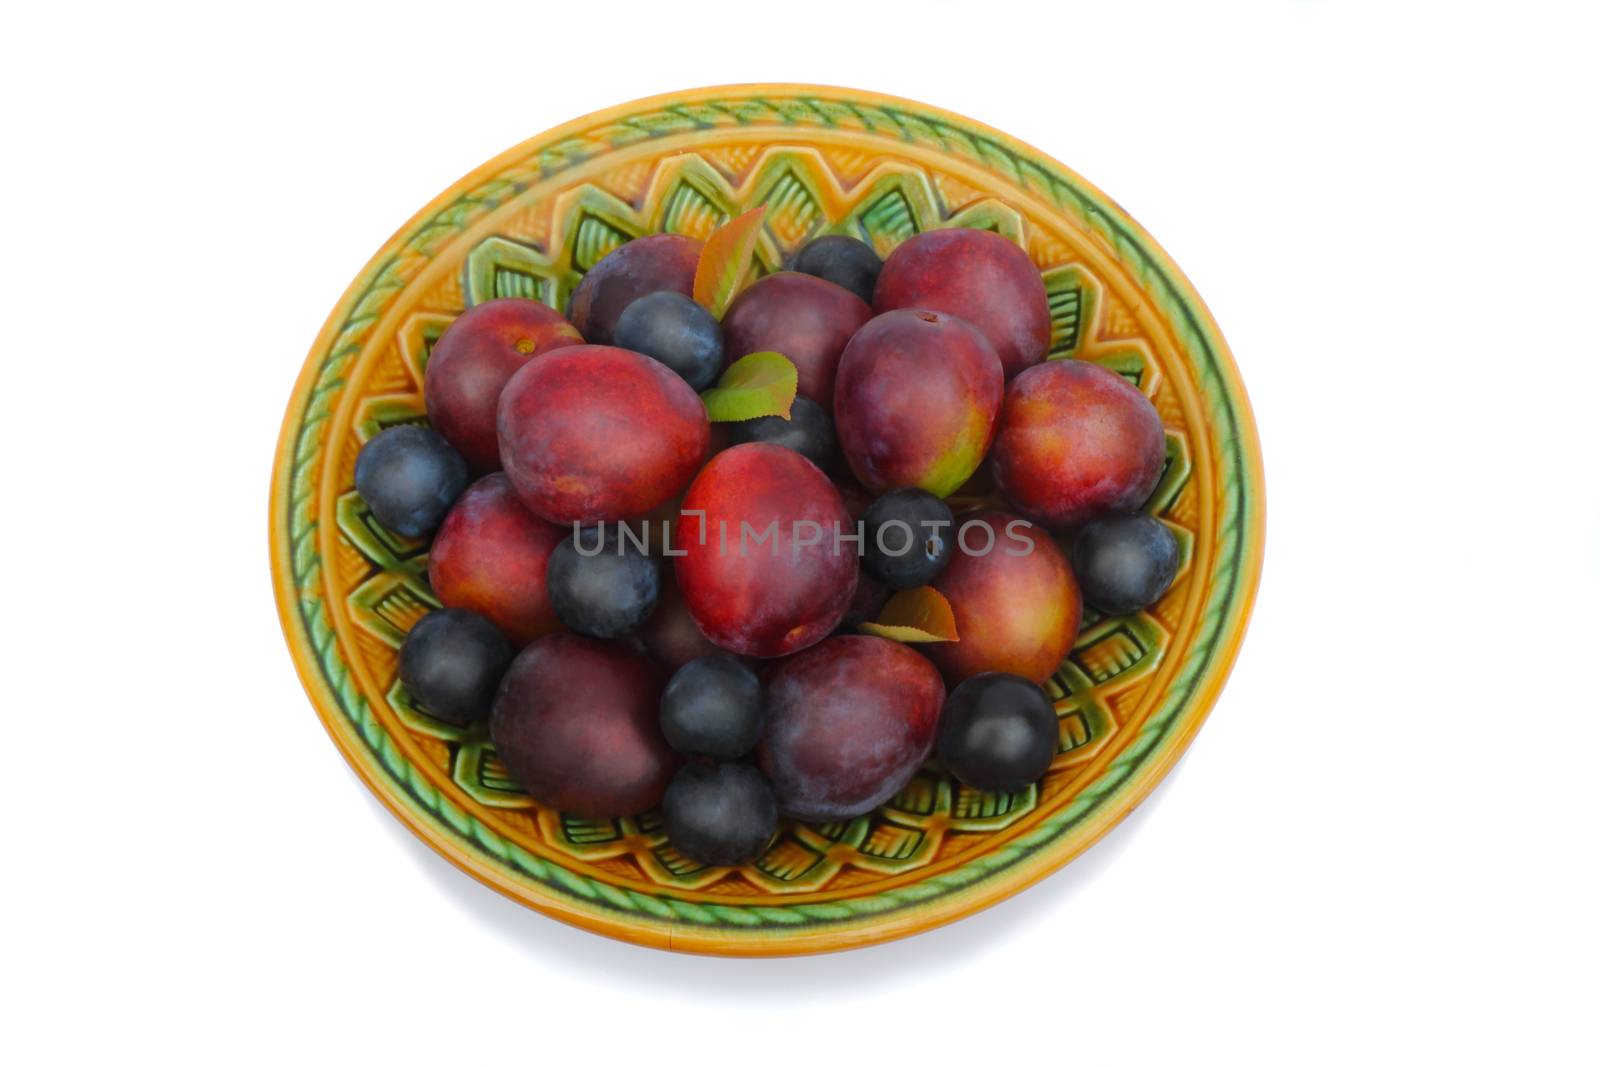 Large ripe purple plums and prunes in a ceramic dish . Presented on a white background.